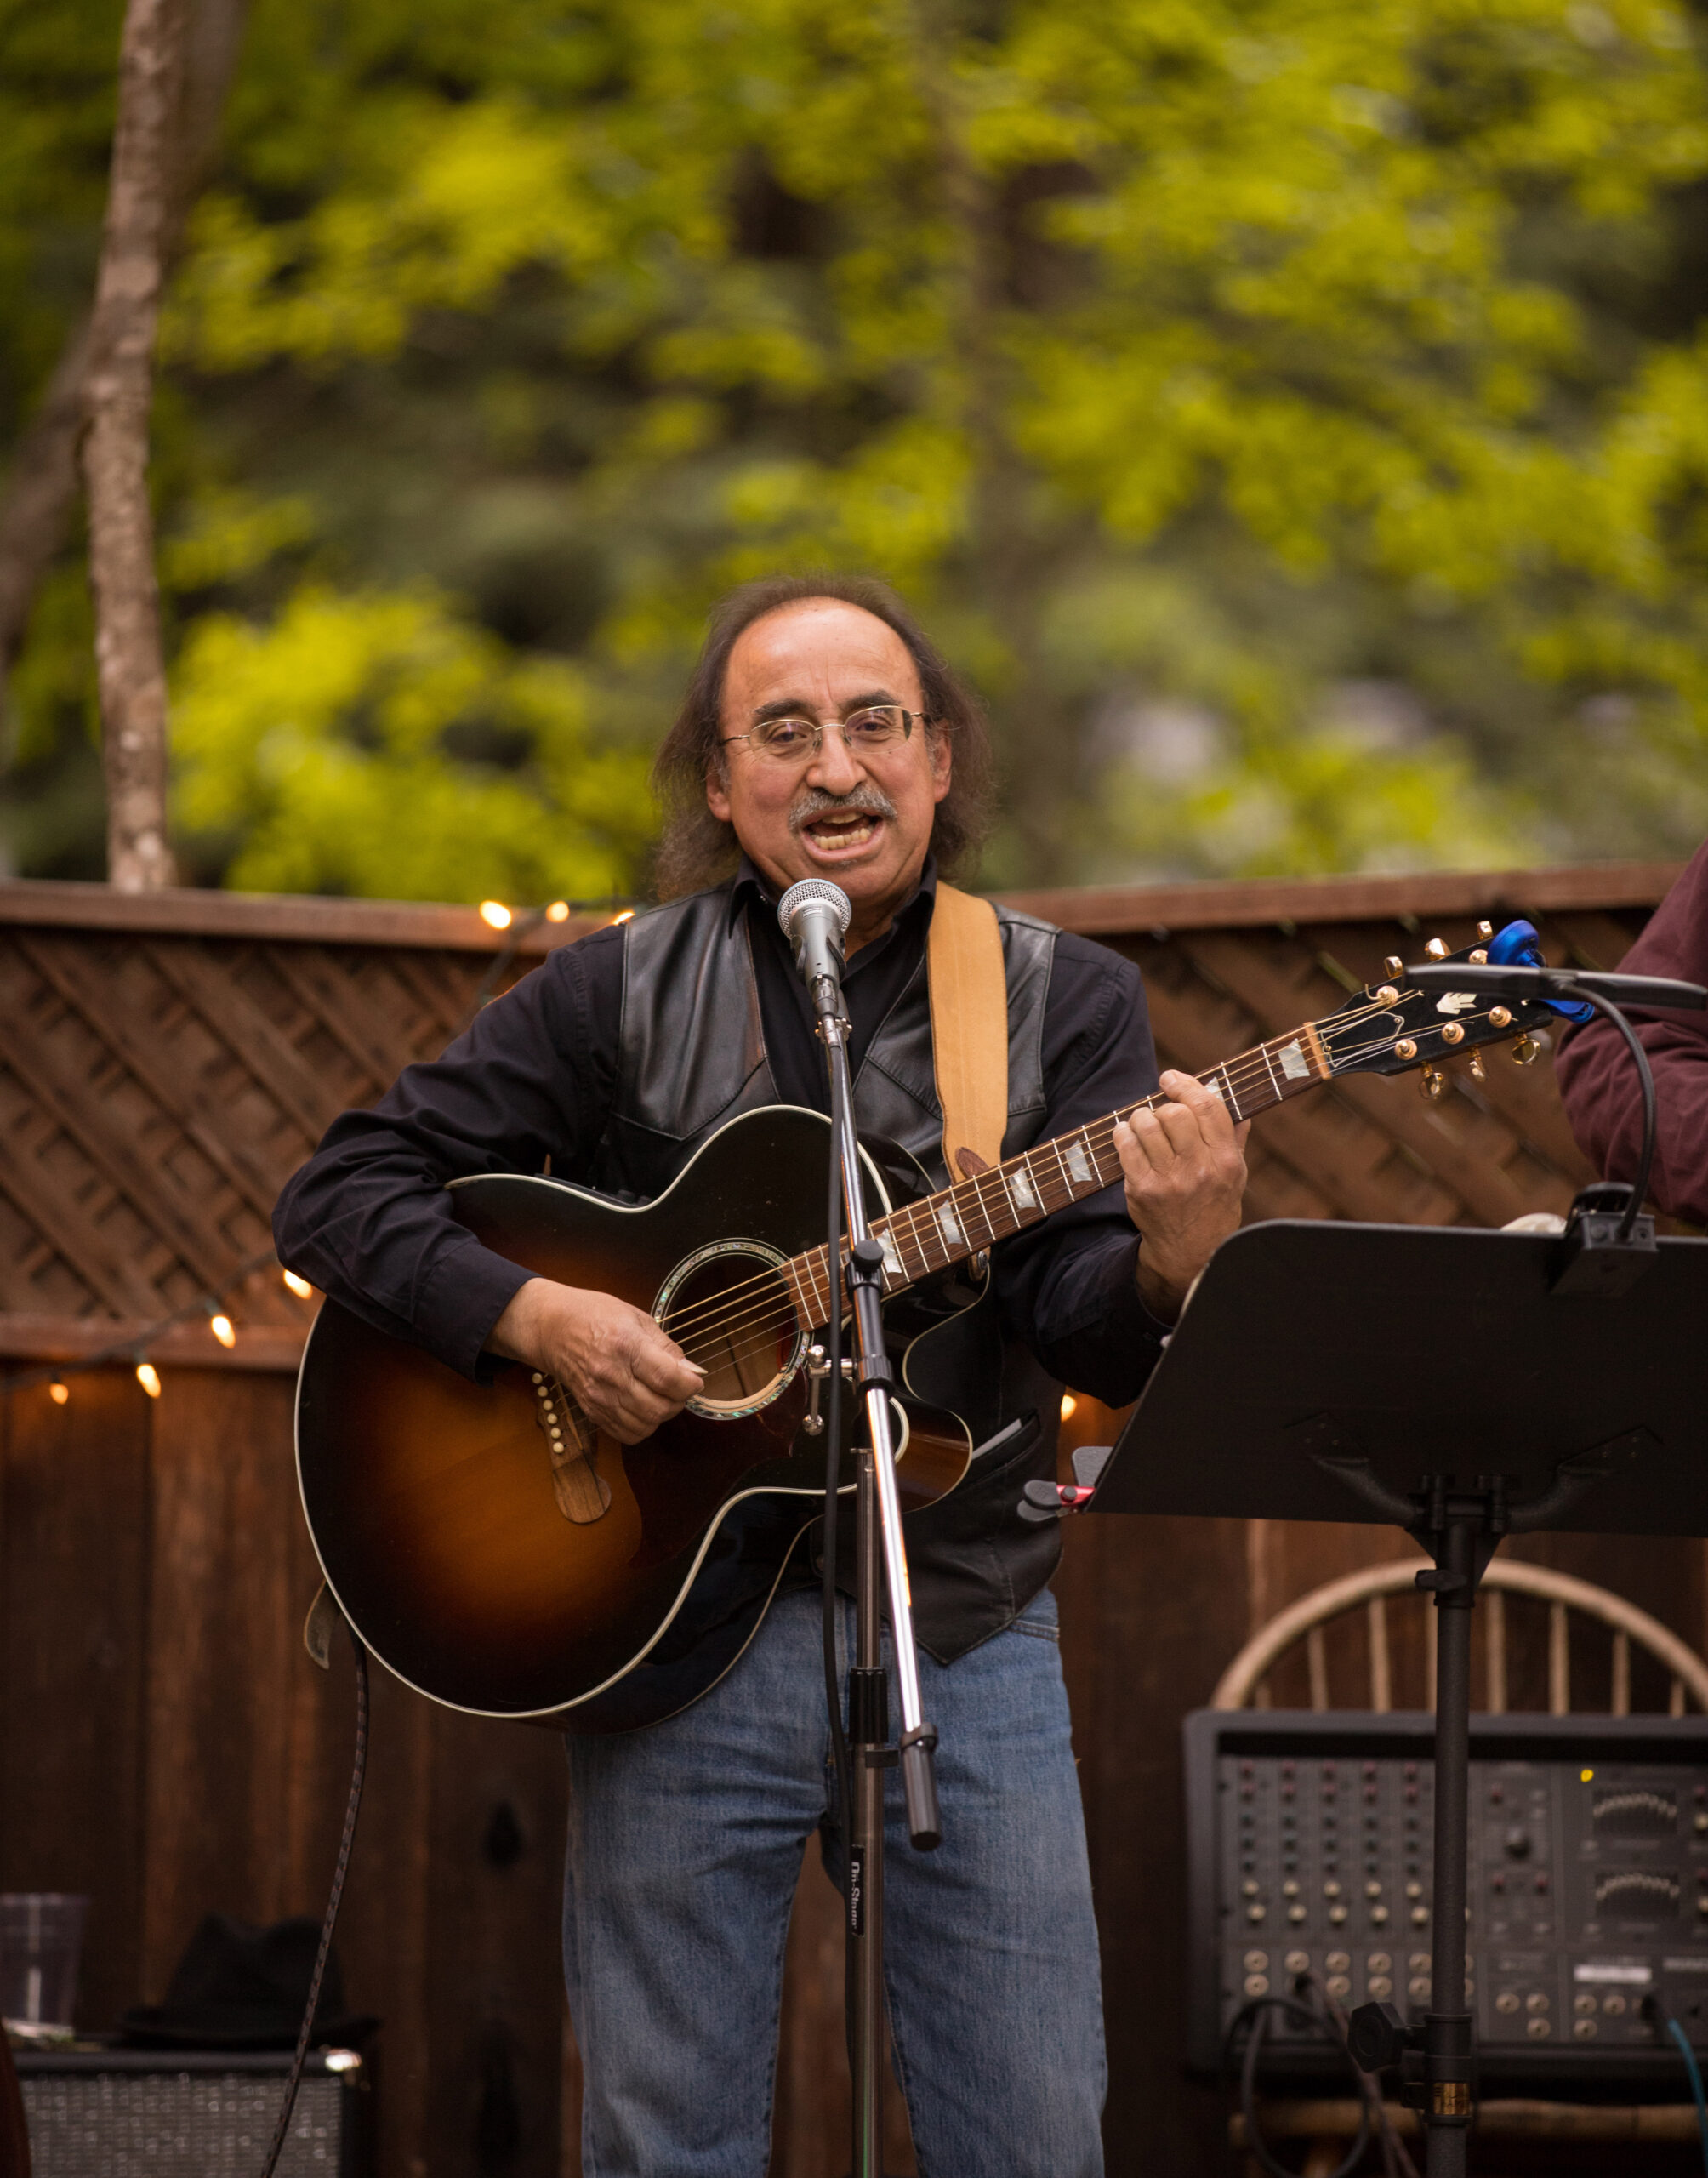 Willie Perez, of Cazador, plays music with his band, during community pizza night with live music at Raymond's Bakery, in Cazadero, Calif., on Friday, May 13, 2022. (Photo by Darryl Bush / For The Press Democrat)